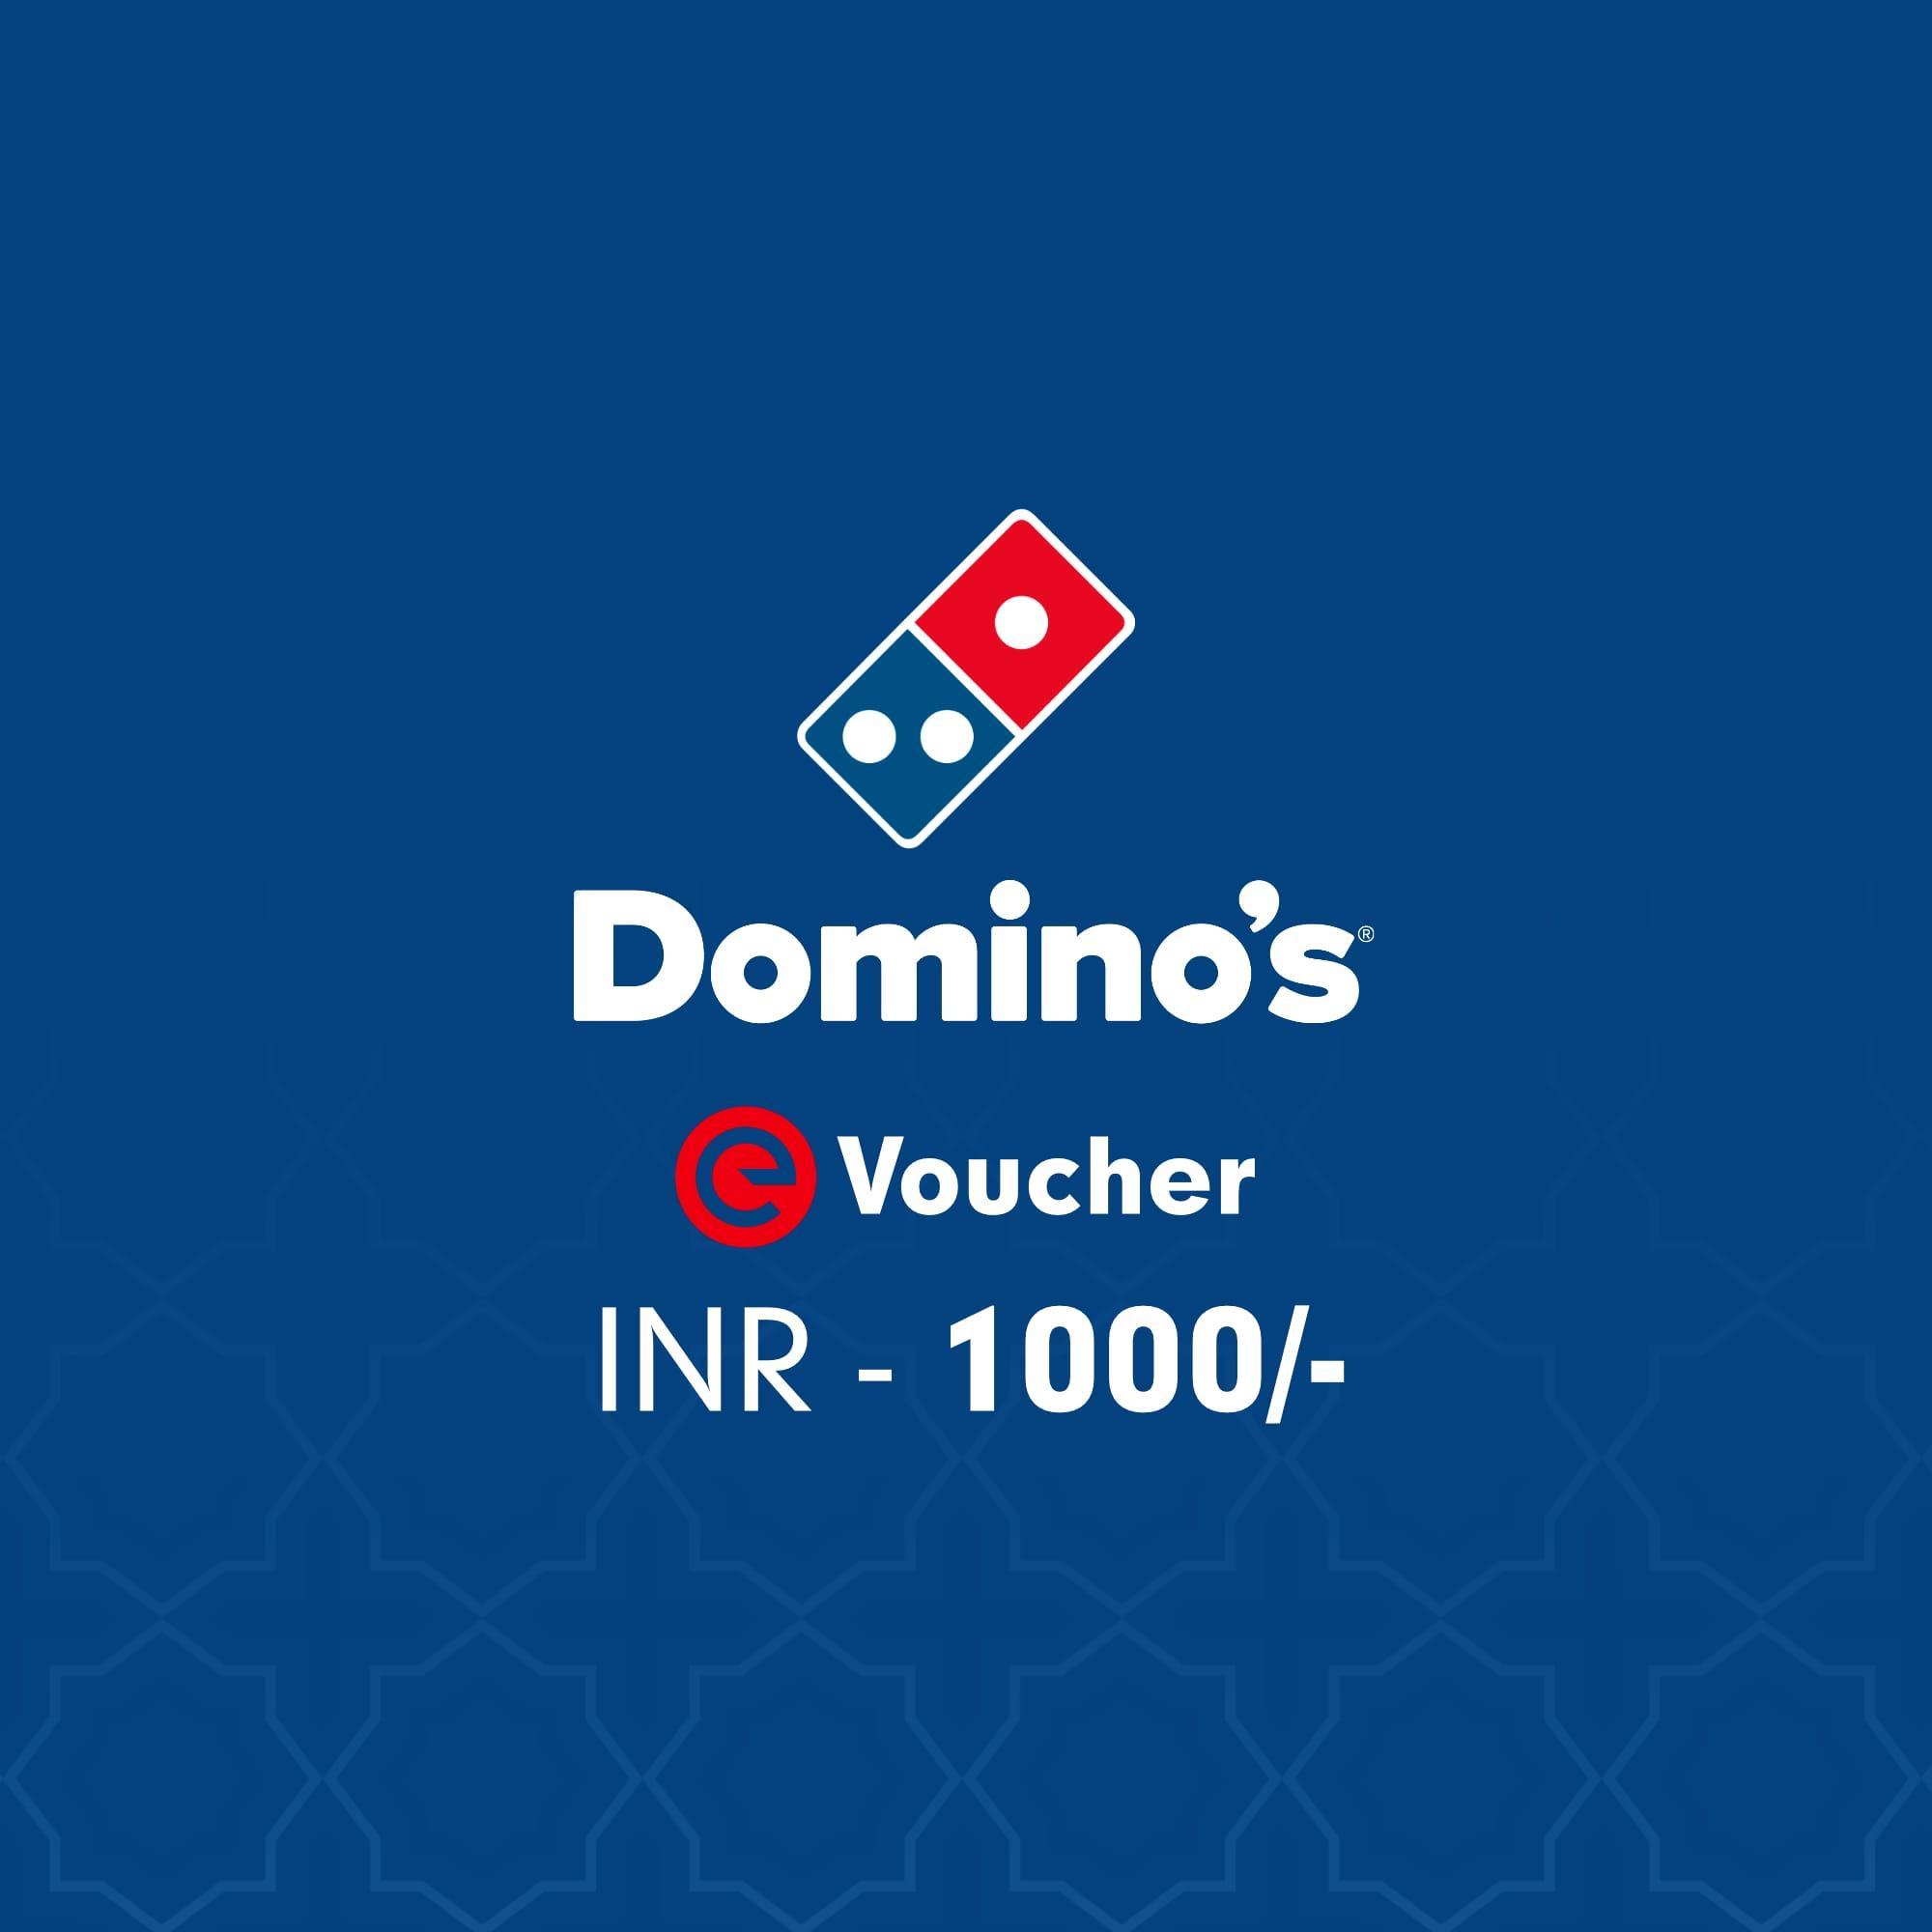 Dominos EVoucher Rs. 1000 Send Gift Cards from Dominos